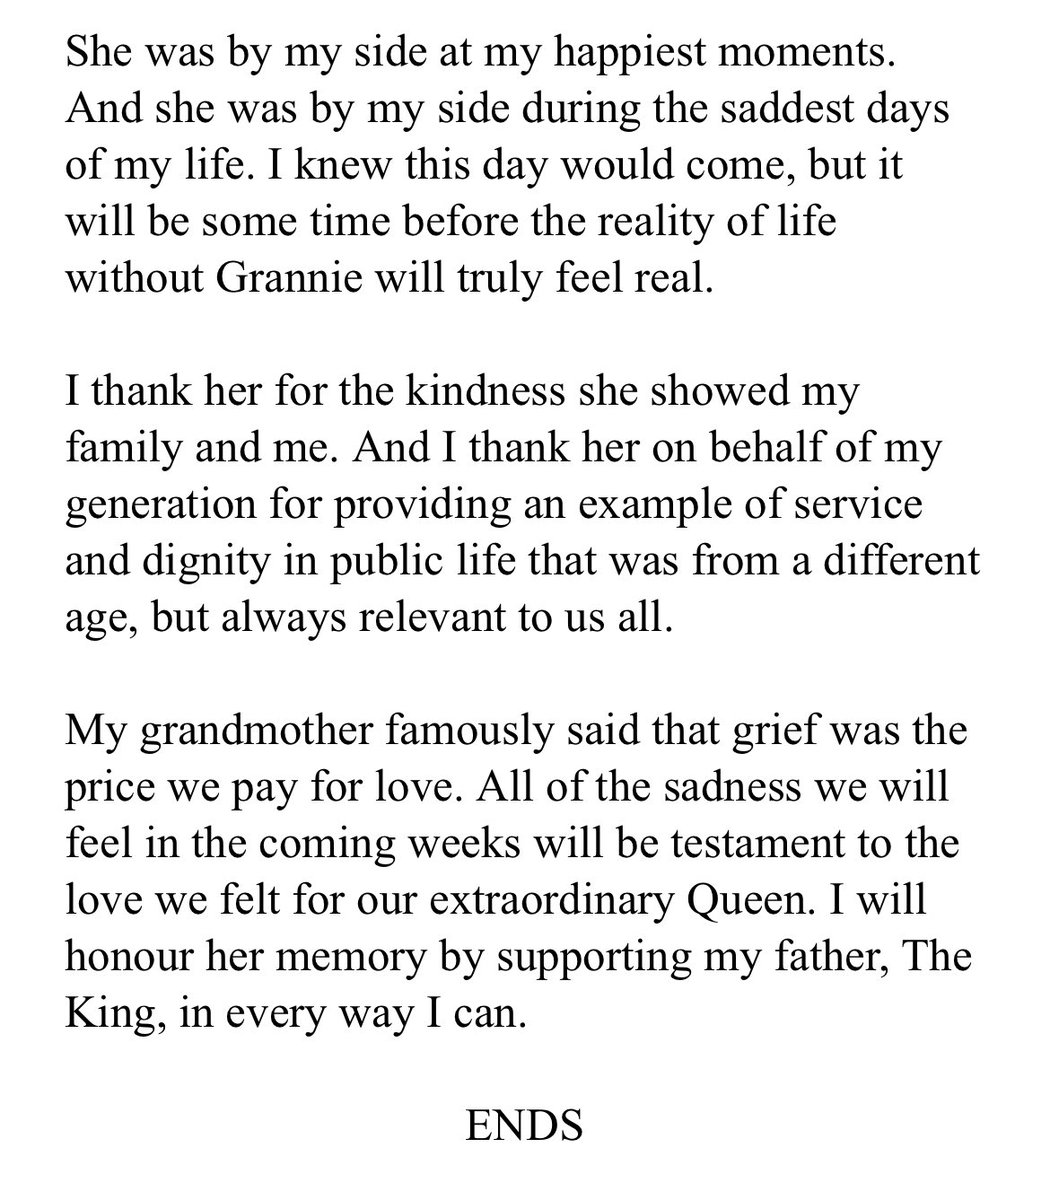 Lovely tribute from the Prince of Wales to ‘Grannie’ #TheQueen